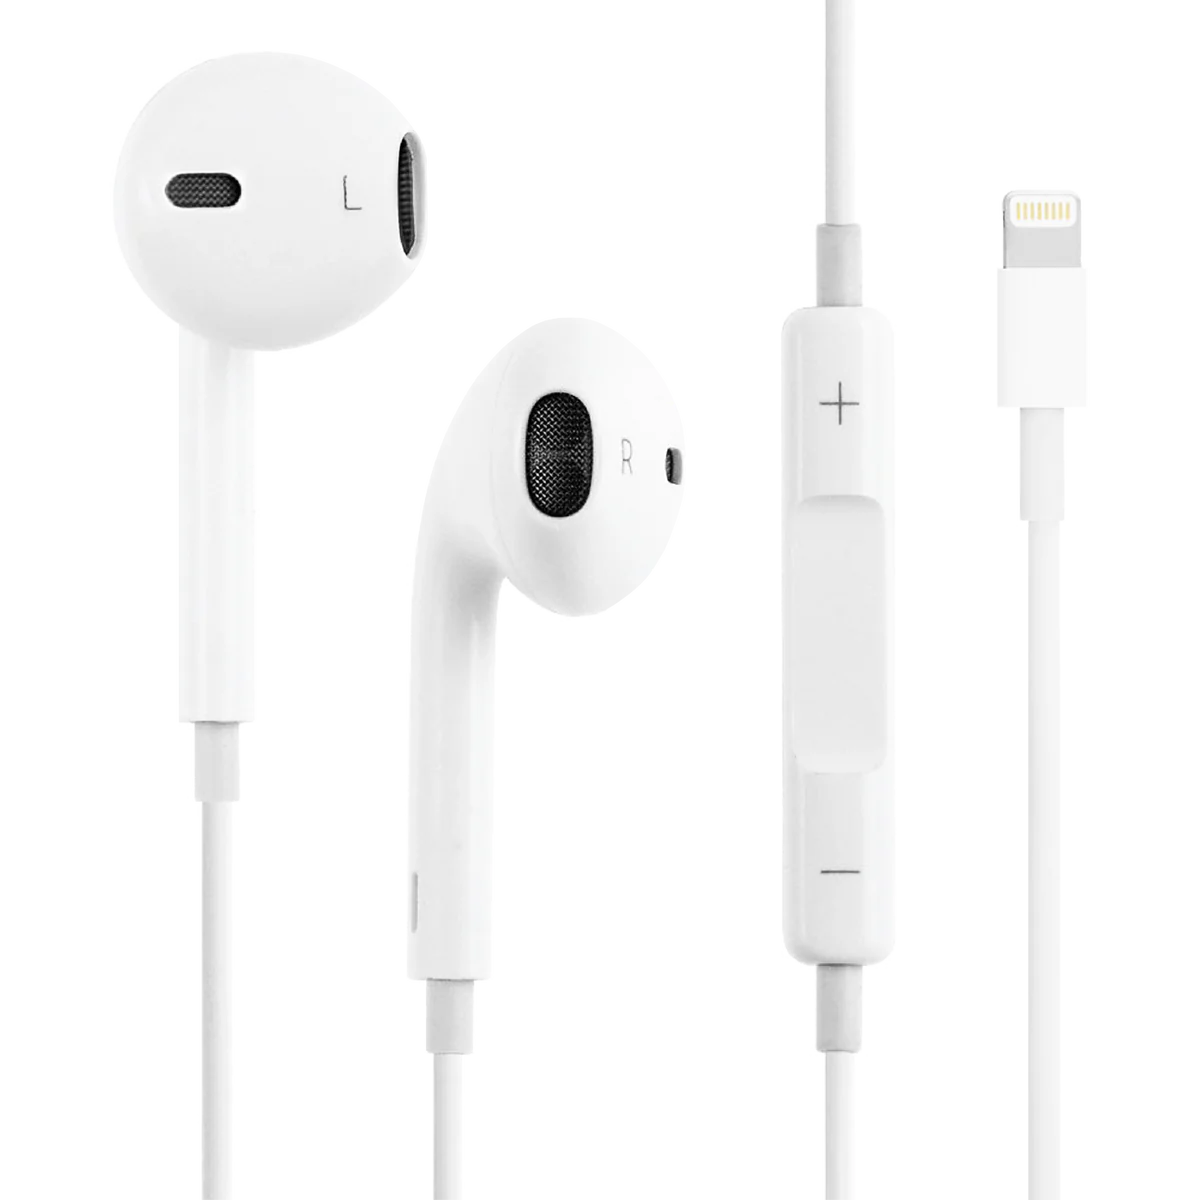 Apple EarPods with Lightning Connector - White